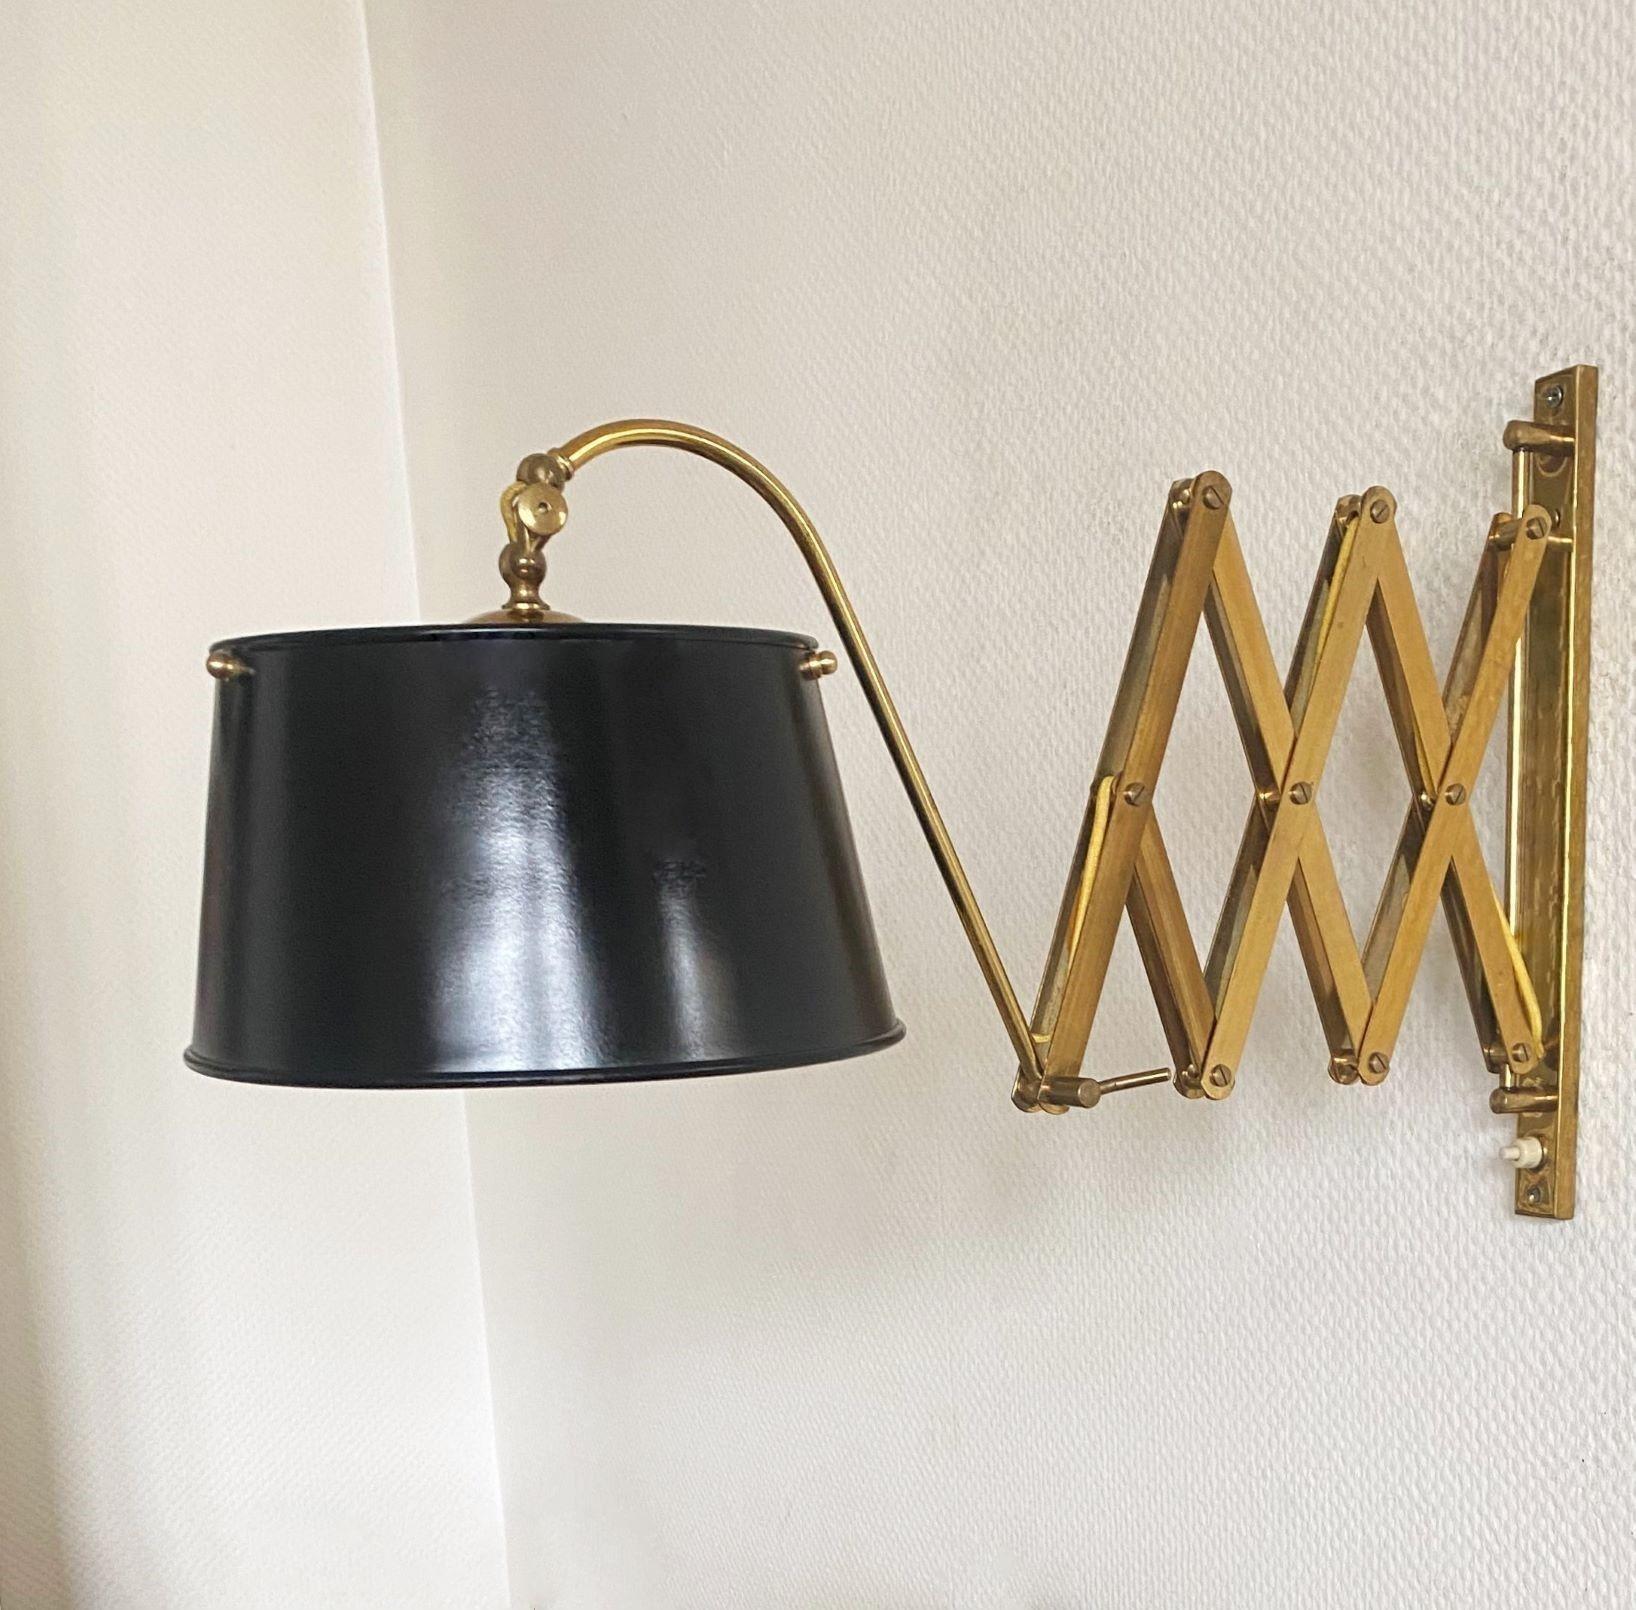 A high-quality brass wall lamp with adjustable scissor arm, Italy, 1940s. Italian Mid-Century design with precise craftsmanship made of gild polished brass, shade of lacquered metal - outside black and inside gilded. The swivel arm system enables